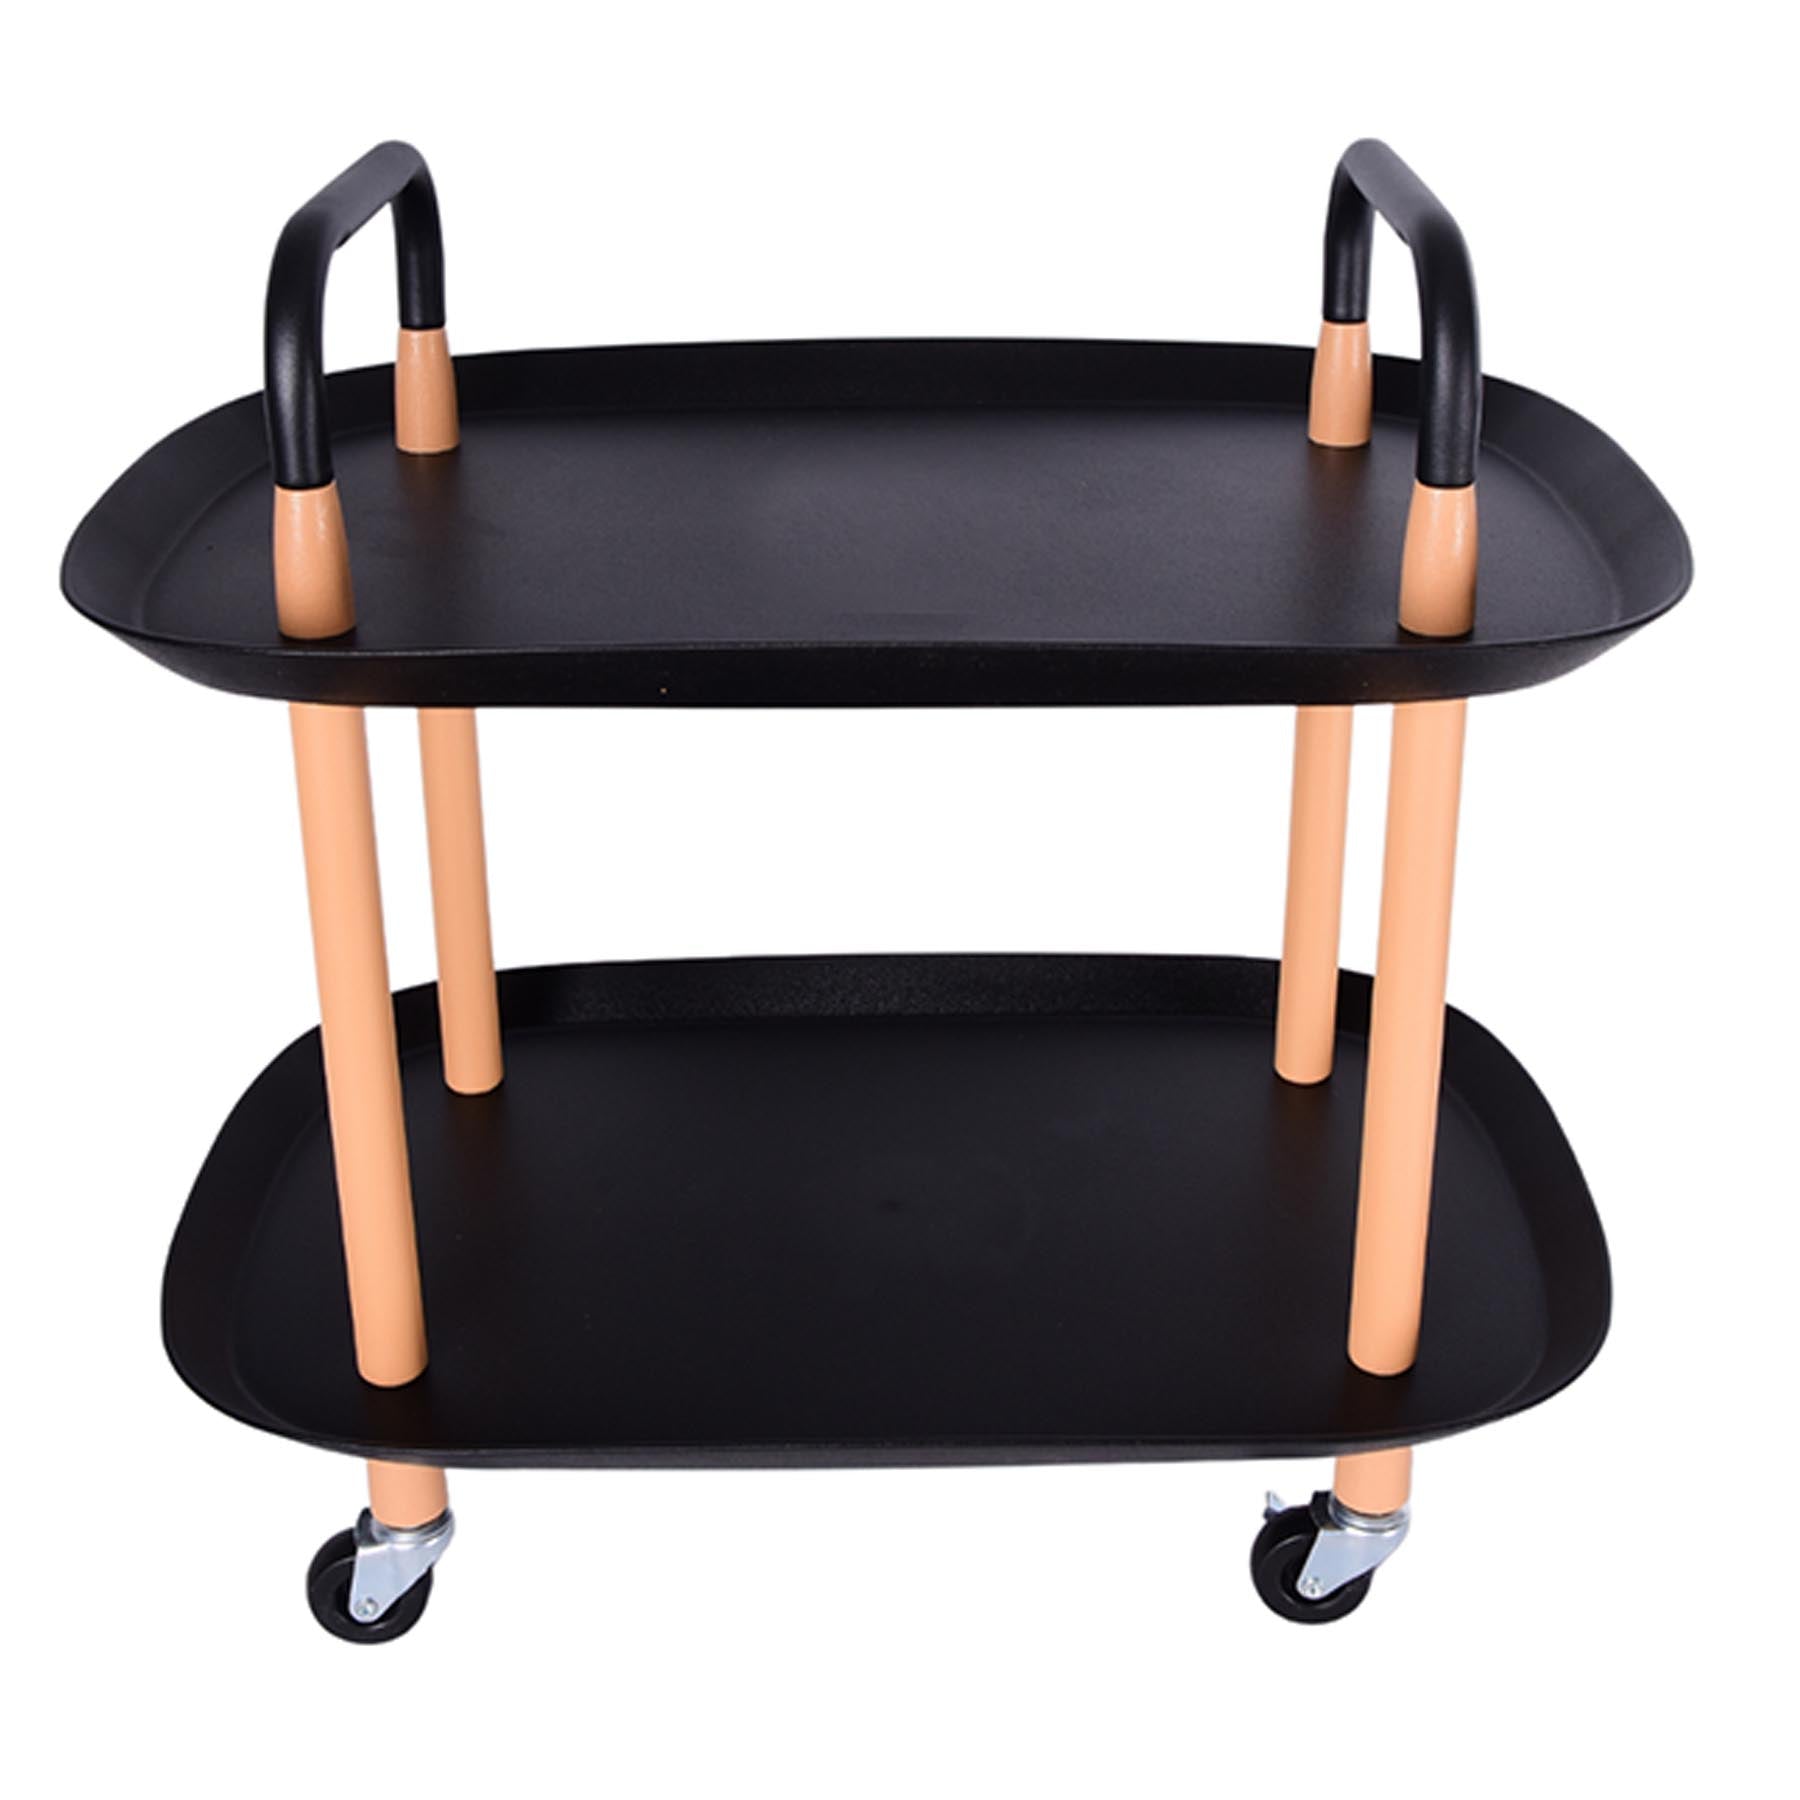 2 Layer Storage Rack With Wheels - Black Color